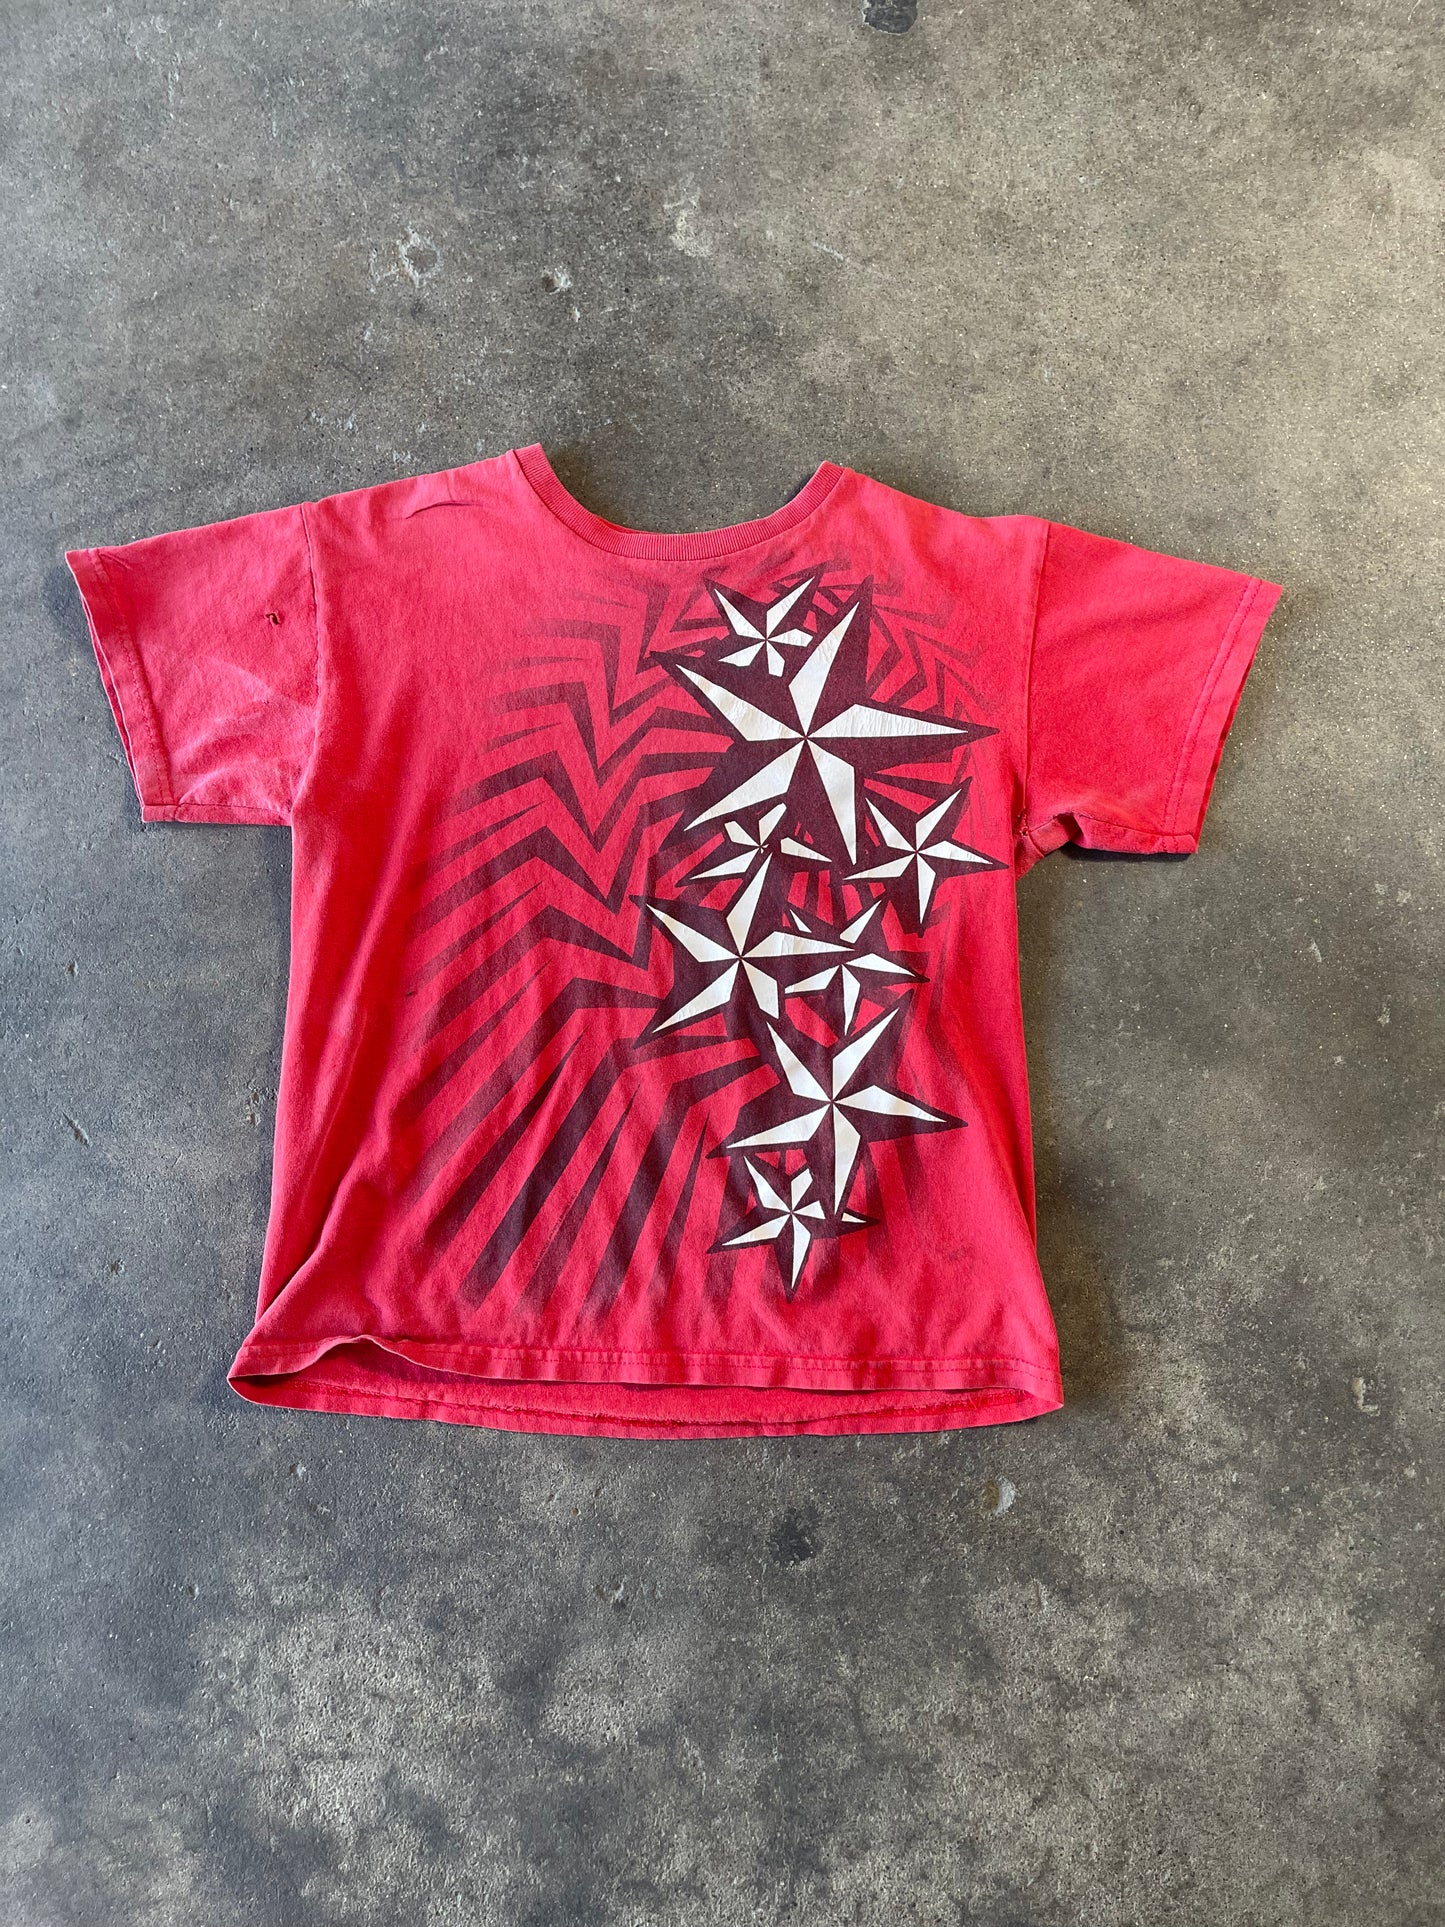 Red Faded Stars Extra Small Distressed